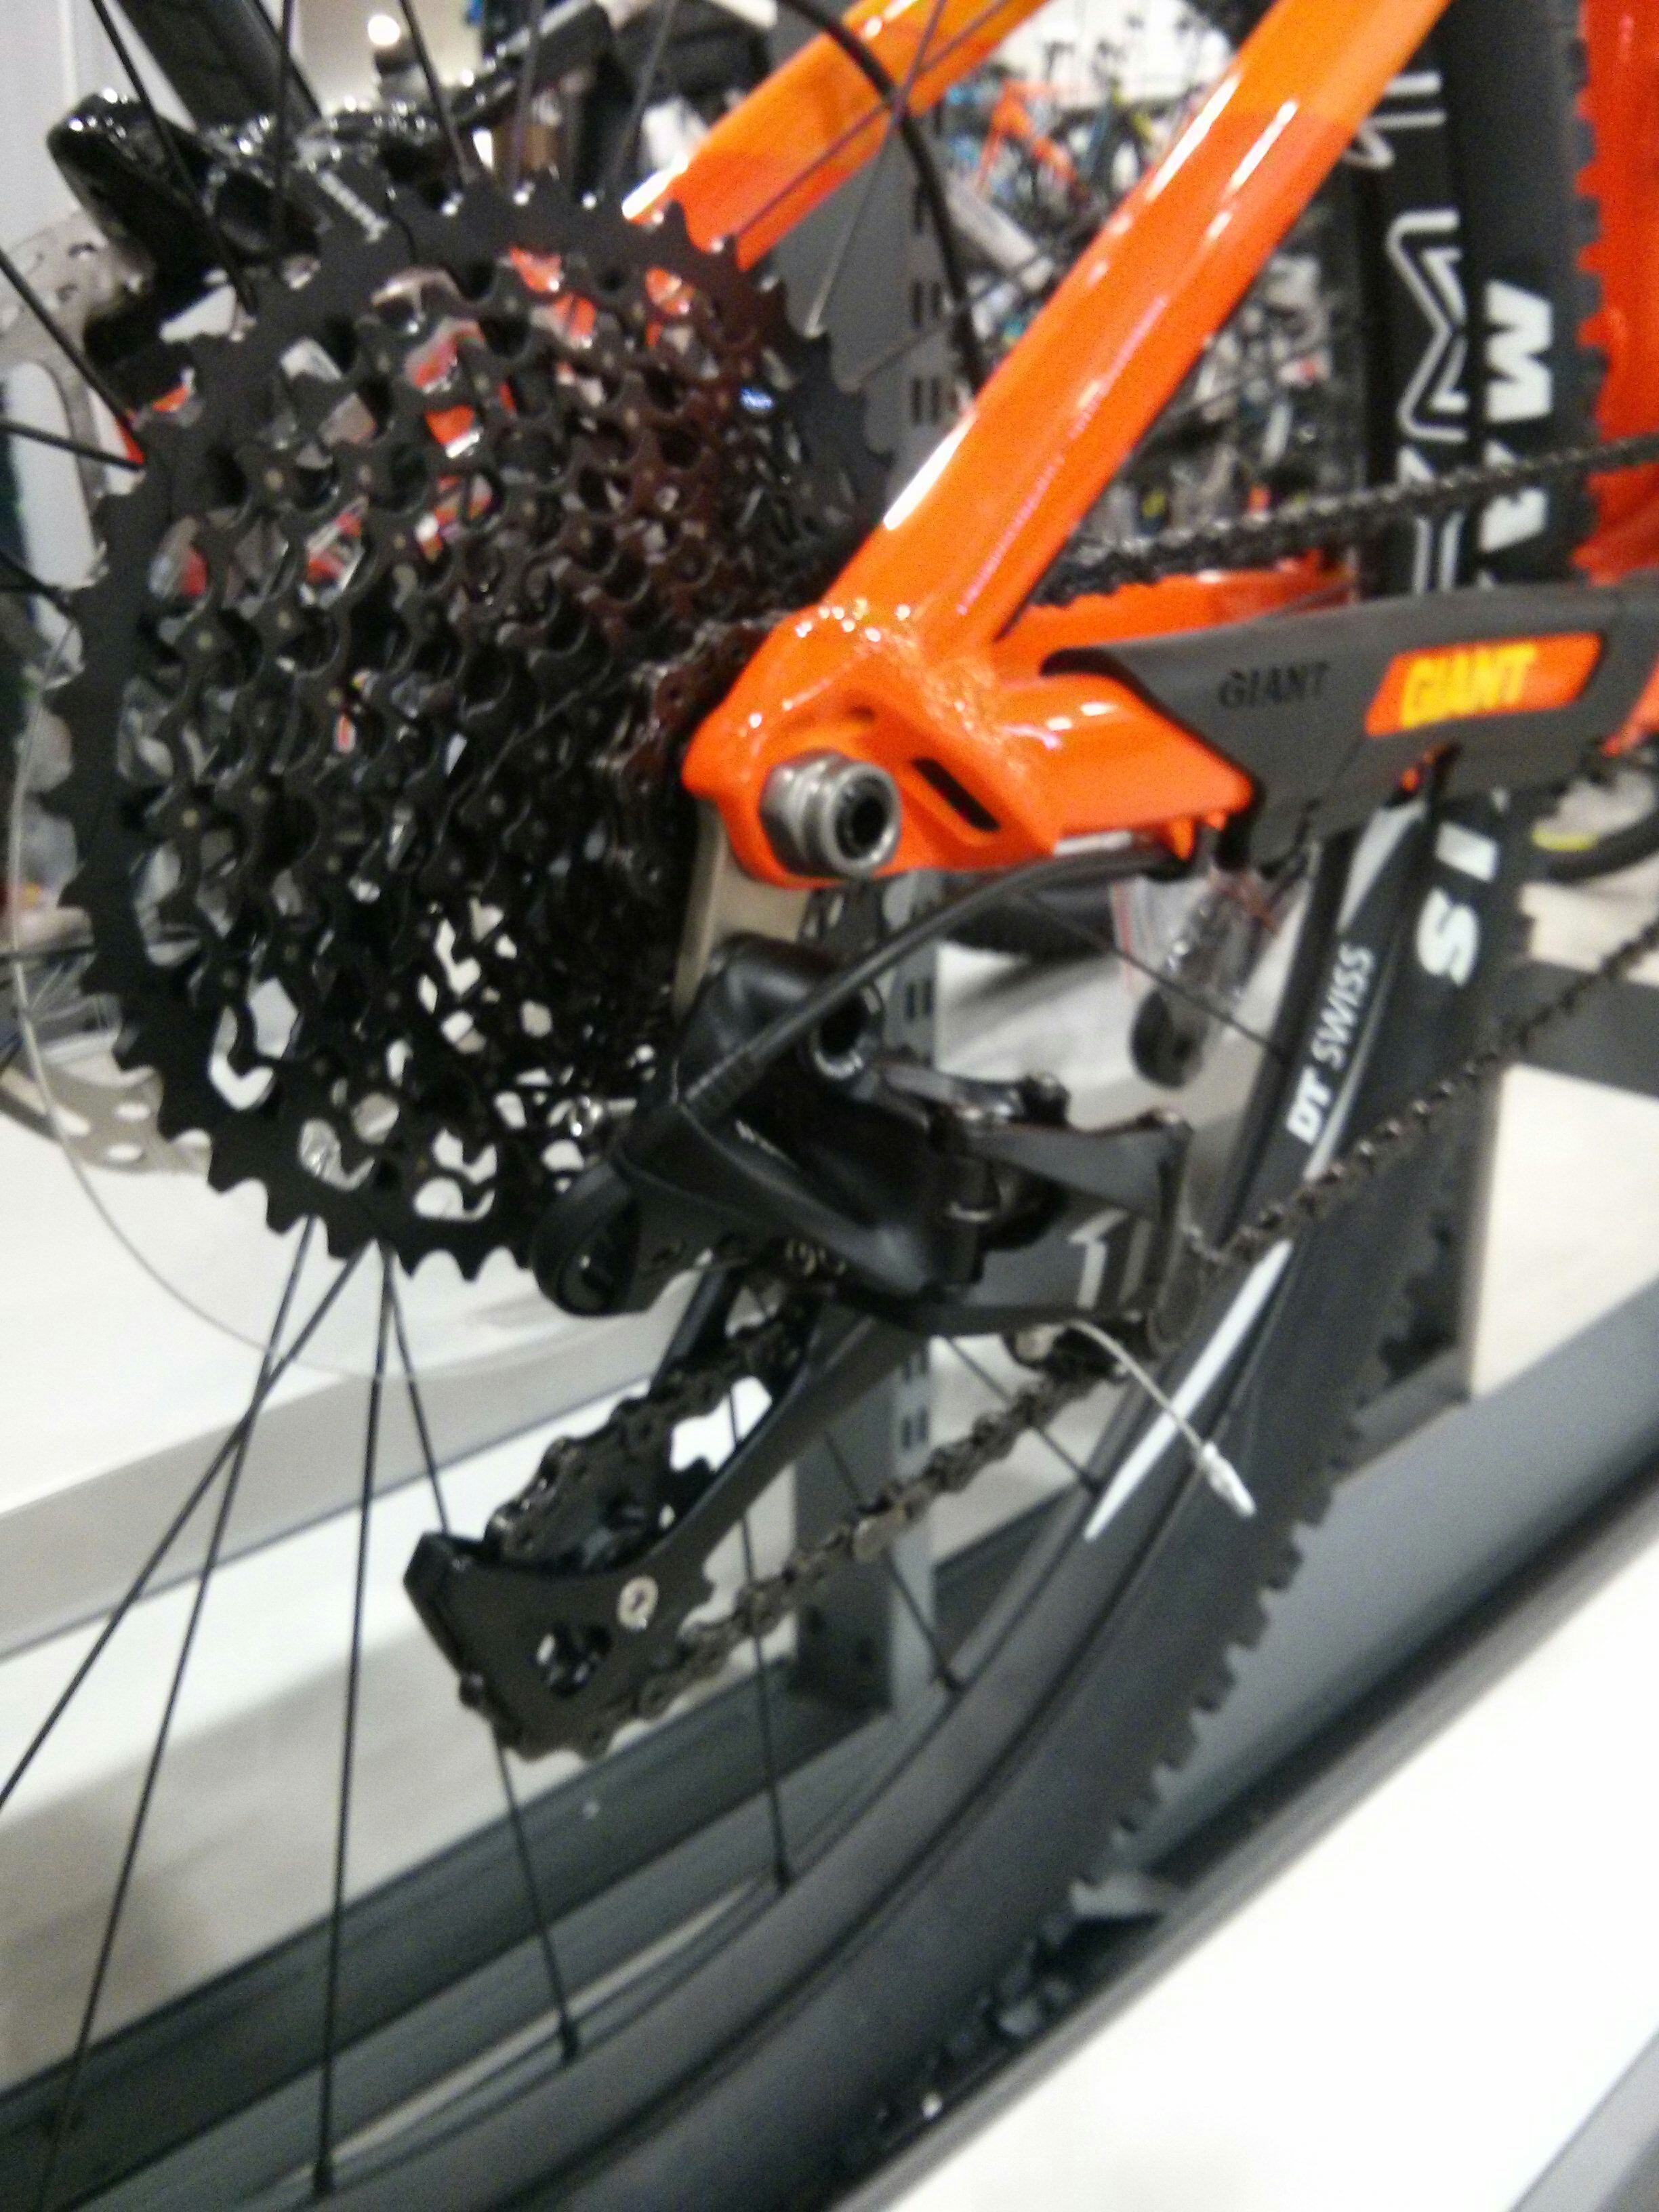 11 speed systems such as SRAM's XO1 use a wide range cassette to maintain a usable range of gears.